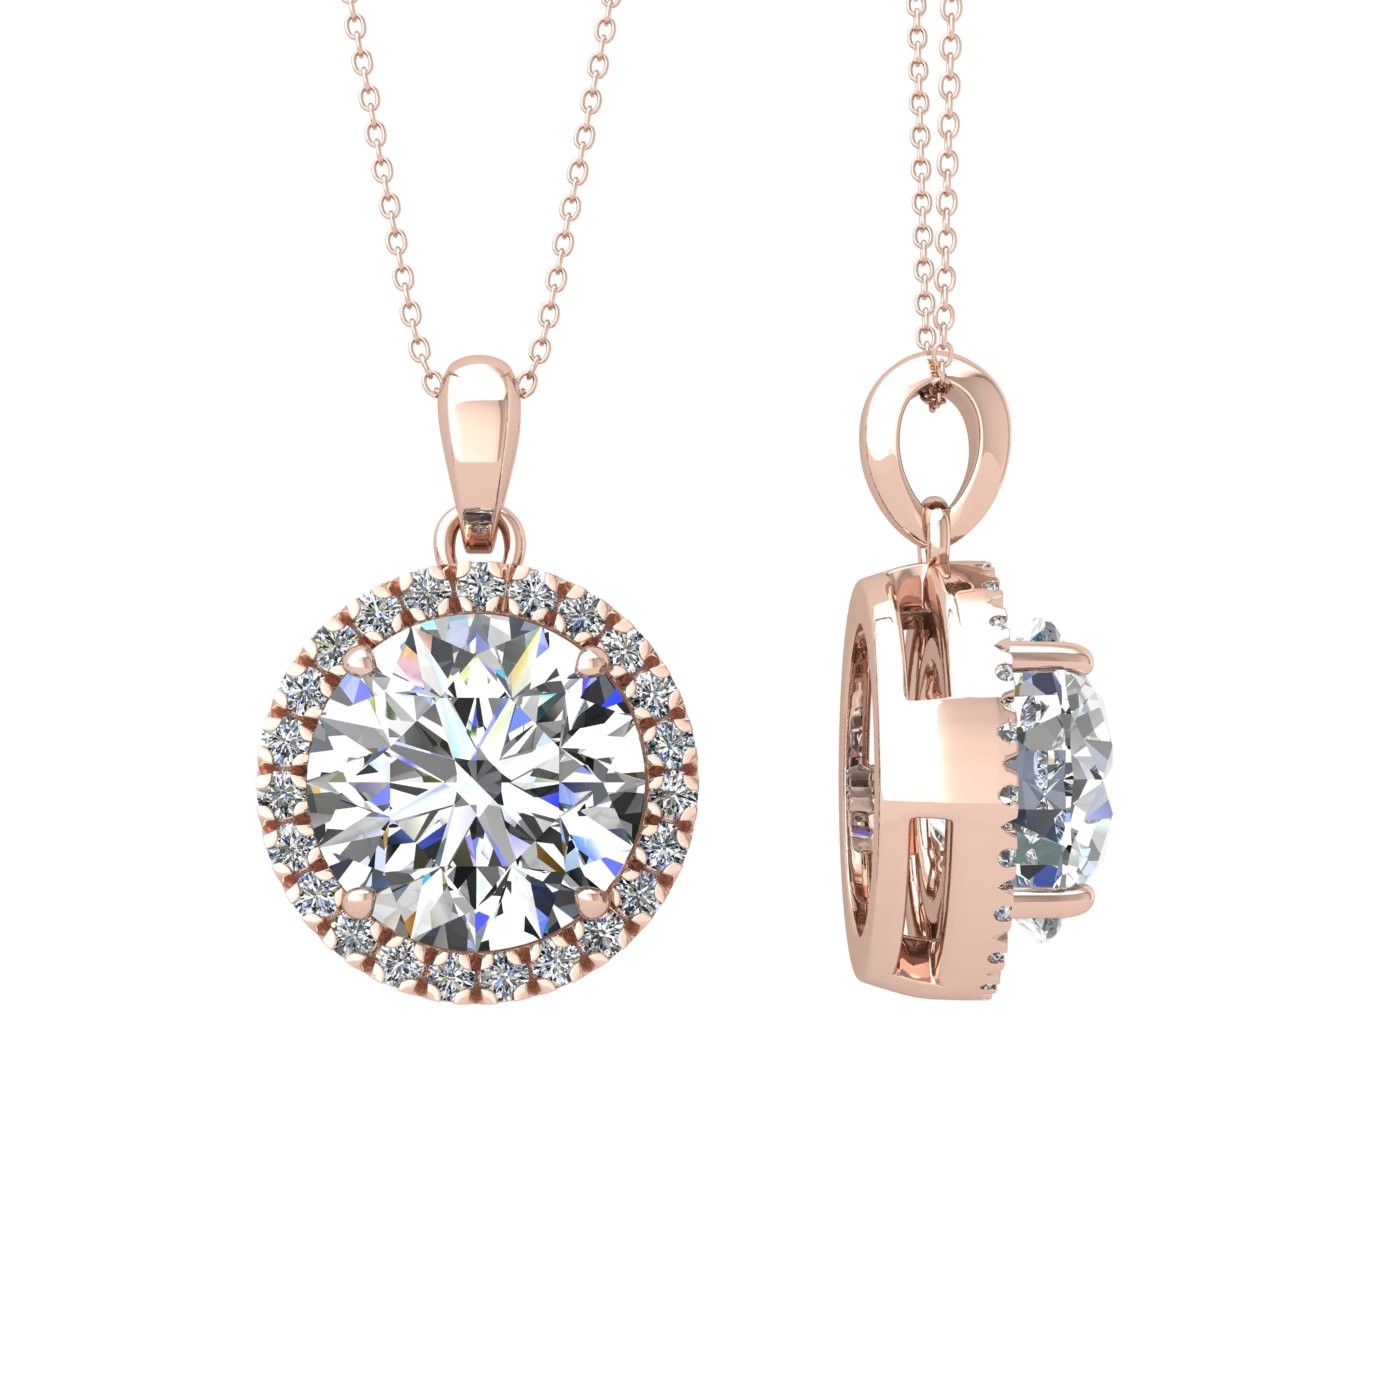 18k rose gold  2,5 ct 4 prong round shape diamond pendant with diamond pavÉ set halo including chain seperate from the pendant